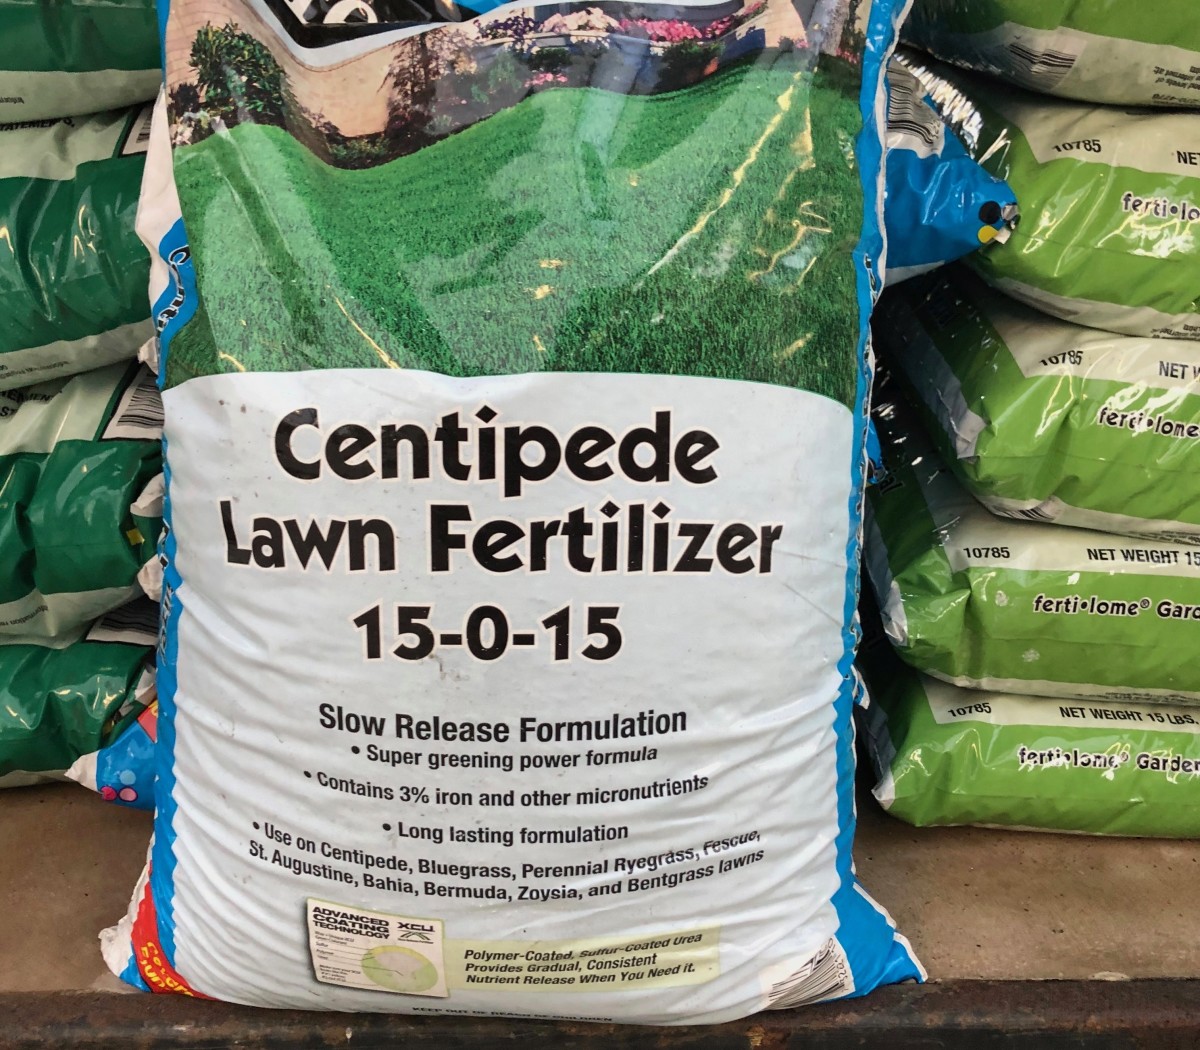 We bought this fertilizer for the centipede grass the first spring after moved into our new (to us) home a couple of years ago. We've never had centipede before so I had to research its needs.